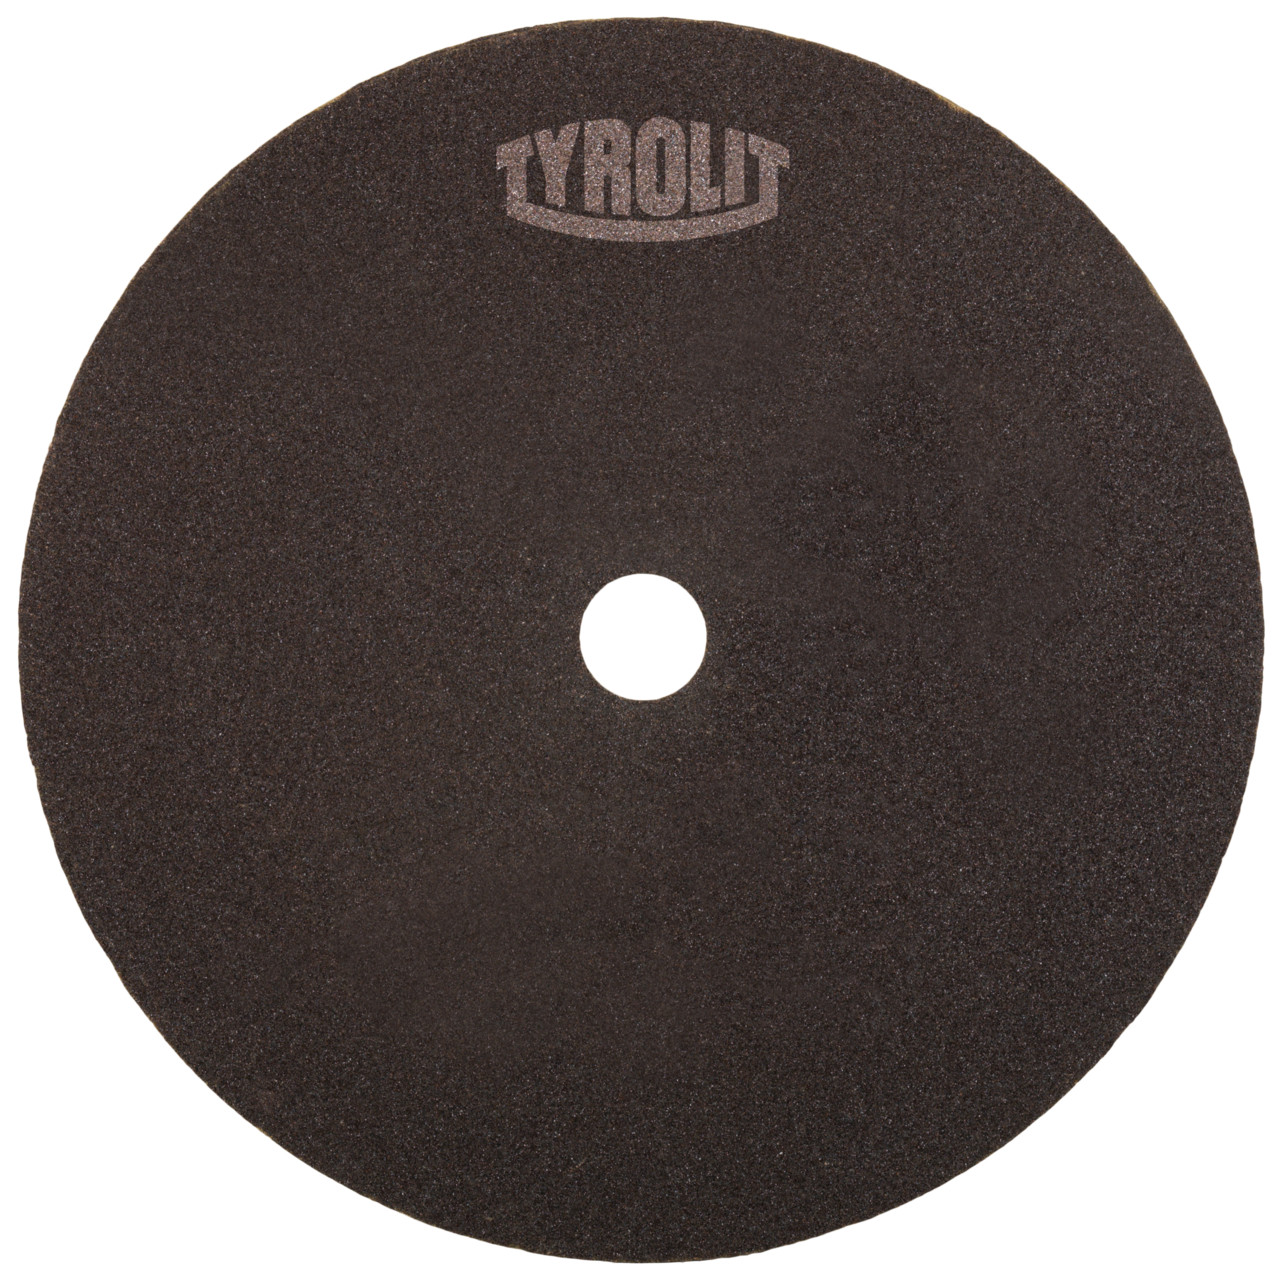 Tyrolit Cutting disc for cutting and saw sharpening DxDxH 150x1.5x20 For steel and HSS, shape: 41N - straight version (non-woven cutting disc), Art. 8833